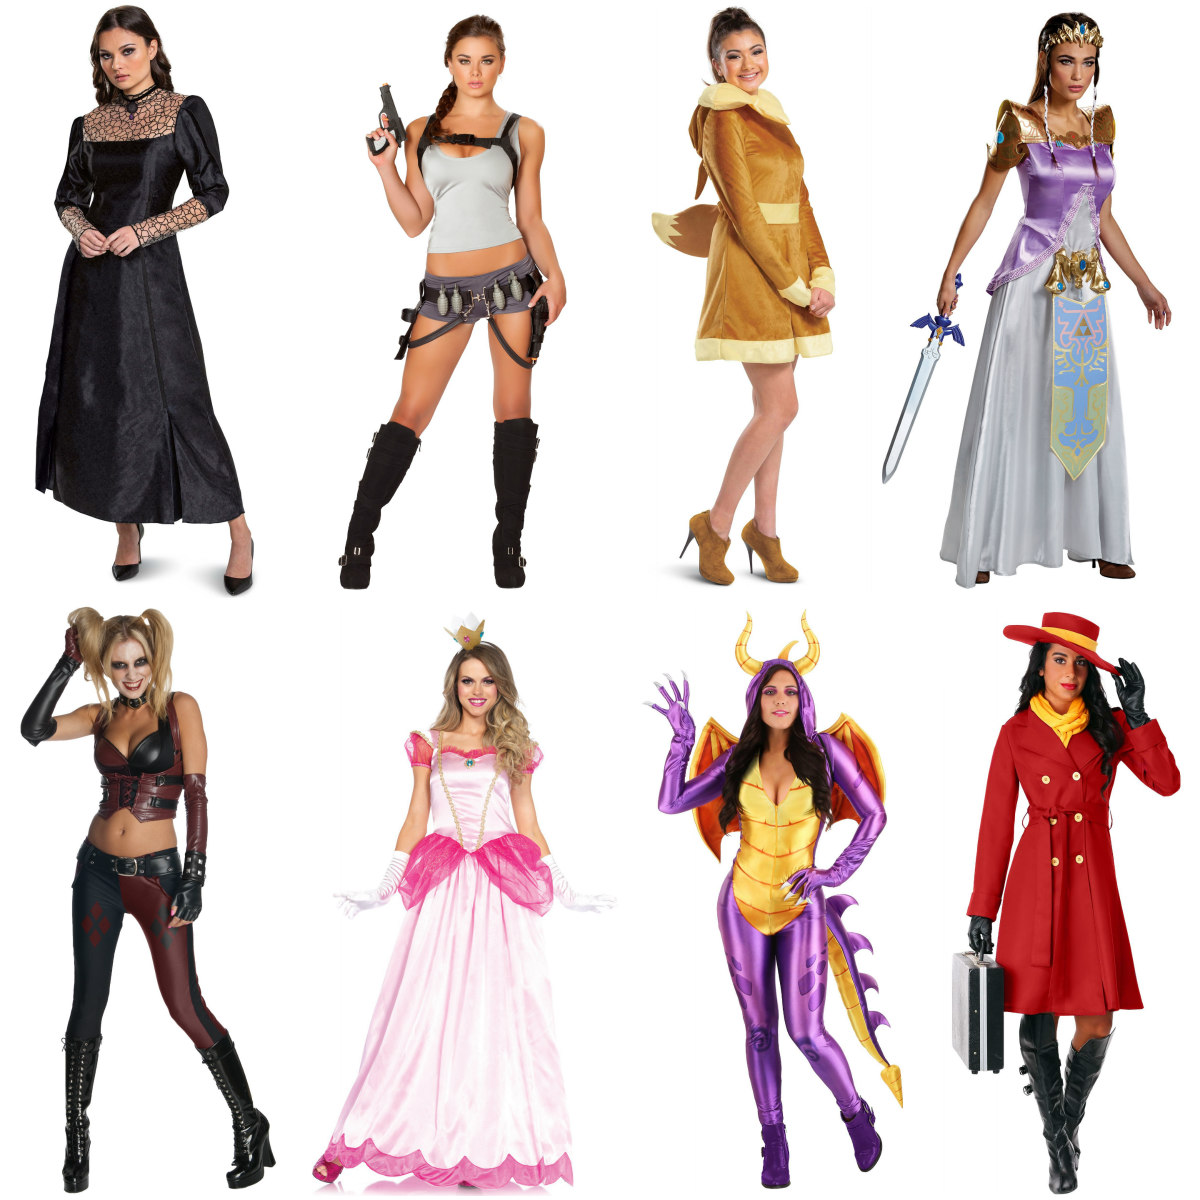 Women's Video Game Costumes